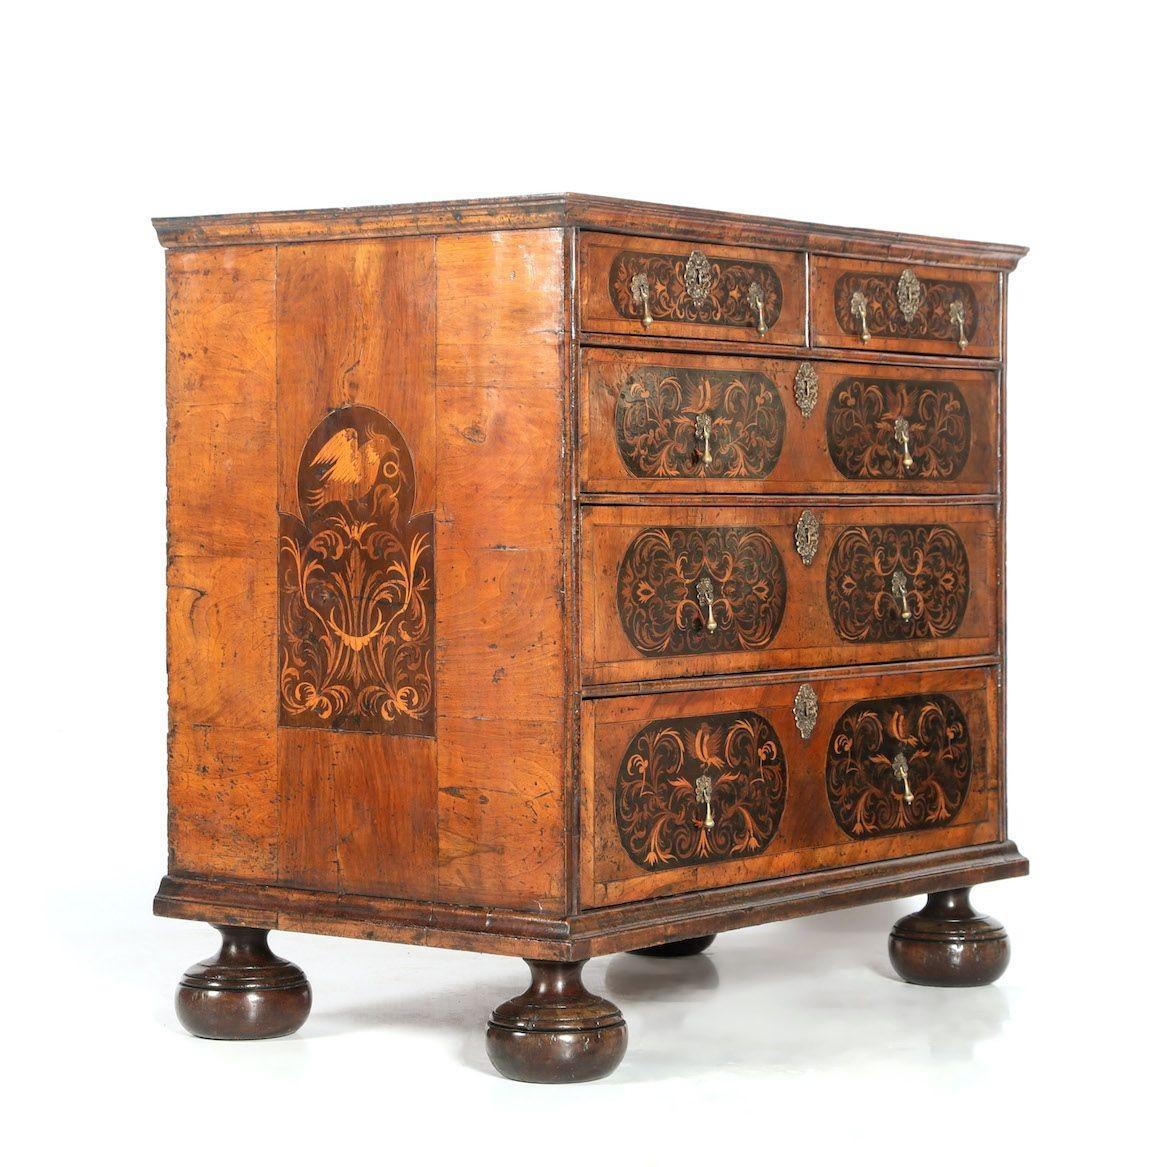 17th c. English William & Mary Walnut and Ebony Seaweed Marquetry Commode In Excellent Condition For Sale In Wichita, KS